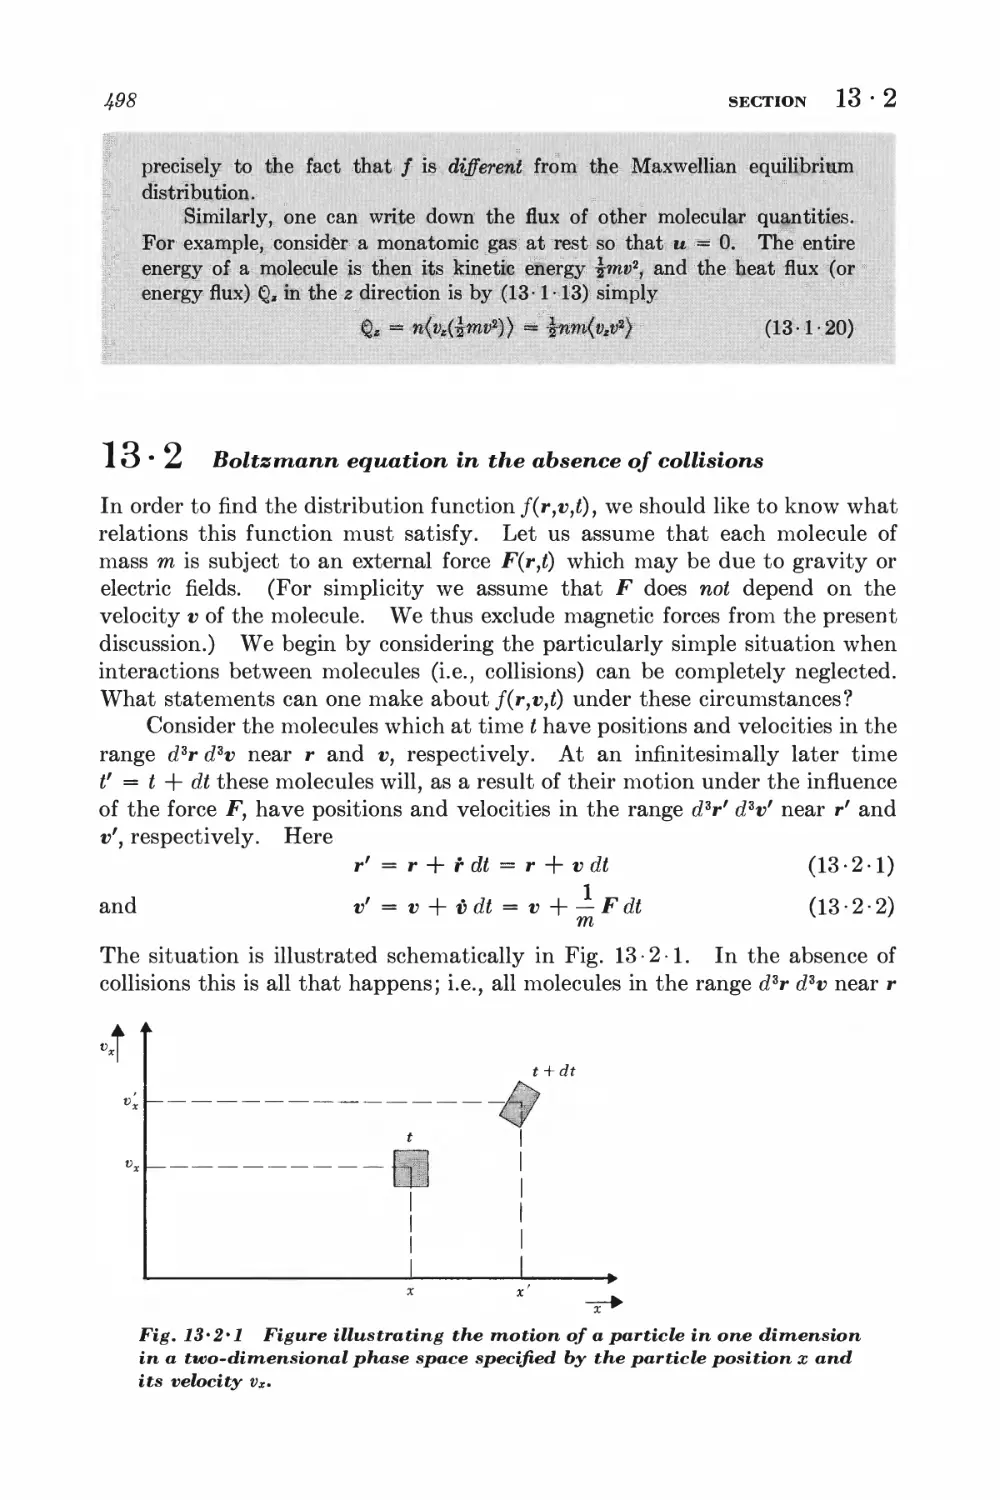 13.2 Boltzmann equation in the absence of collisions